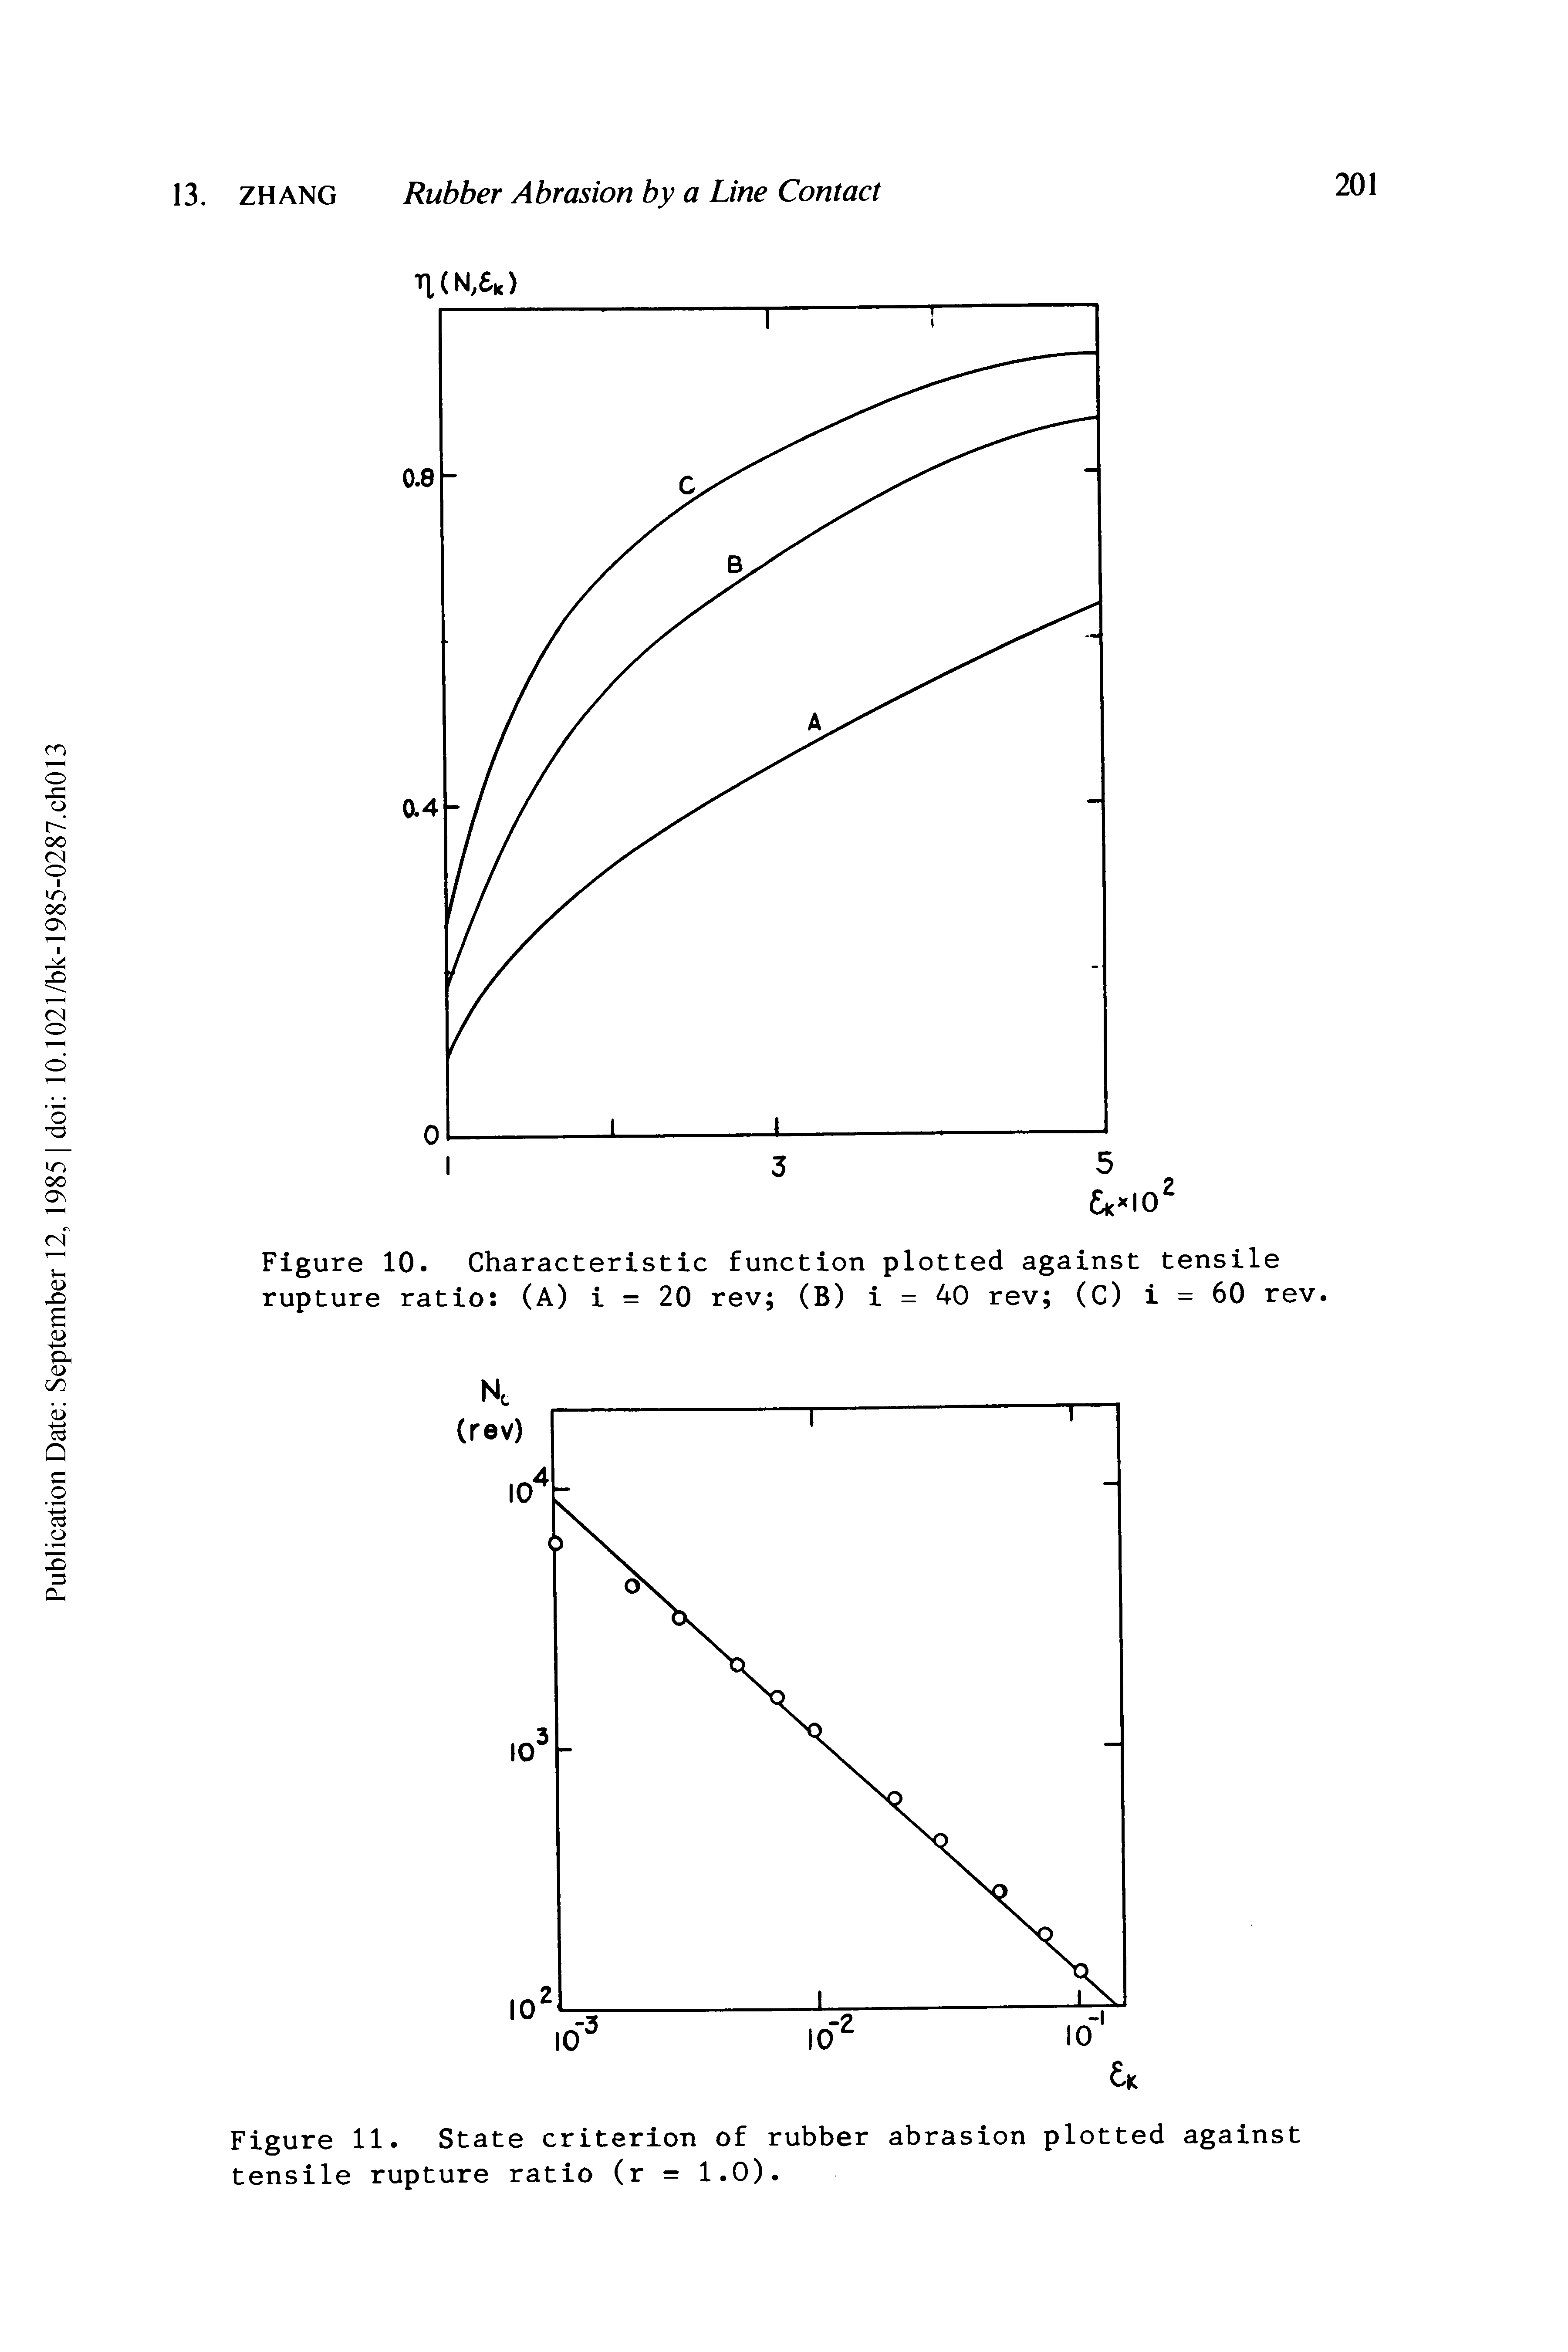 Figure 10. Characteristic function plotted against tensile rupture ratio (A) i = 20 rev (B) i = 40 rev (C) i = 60 rev.